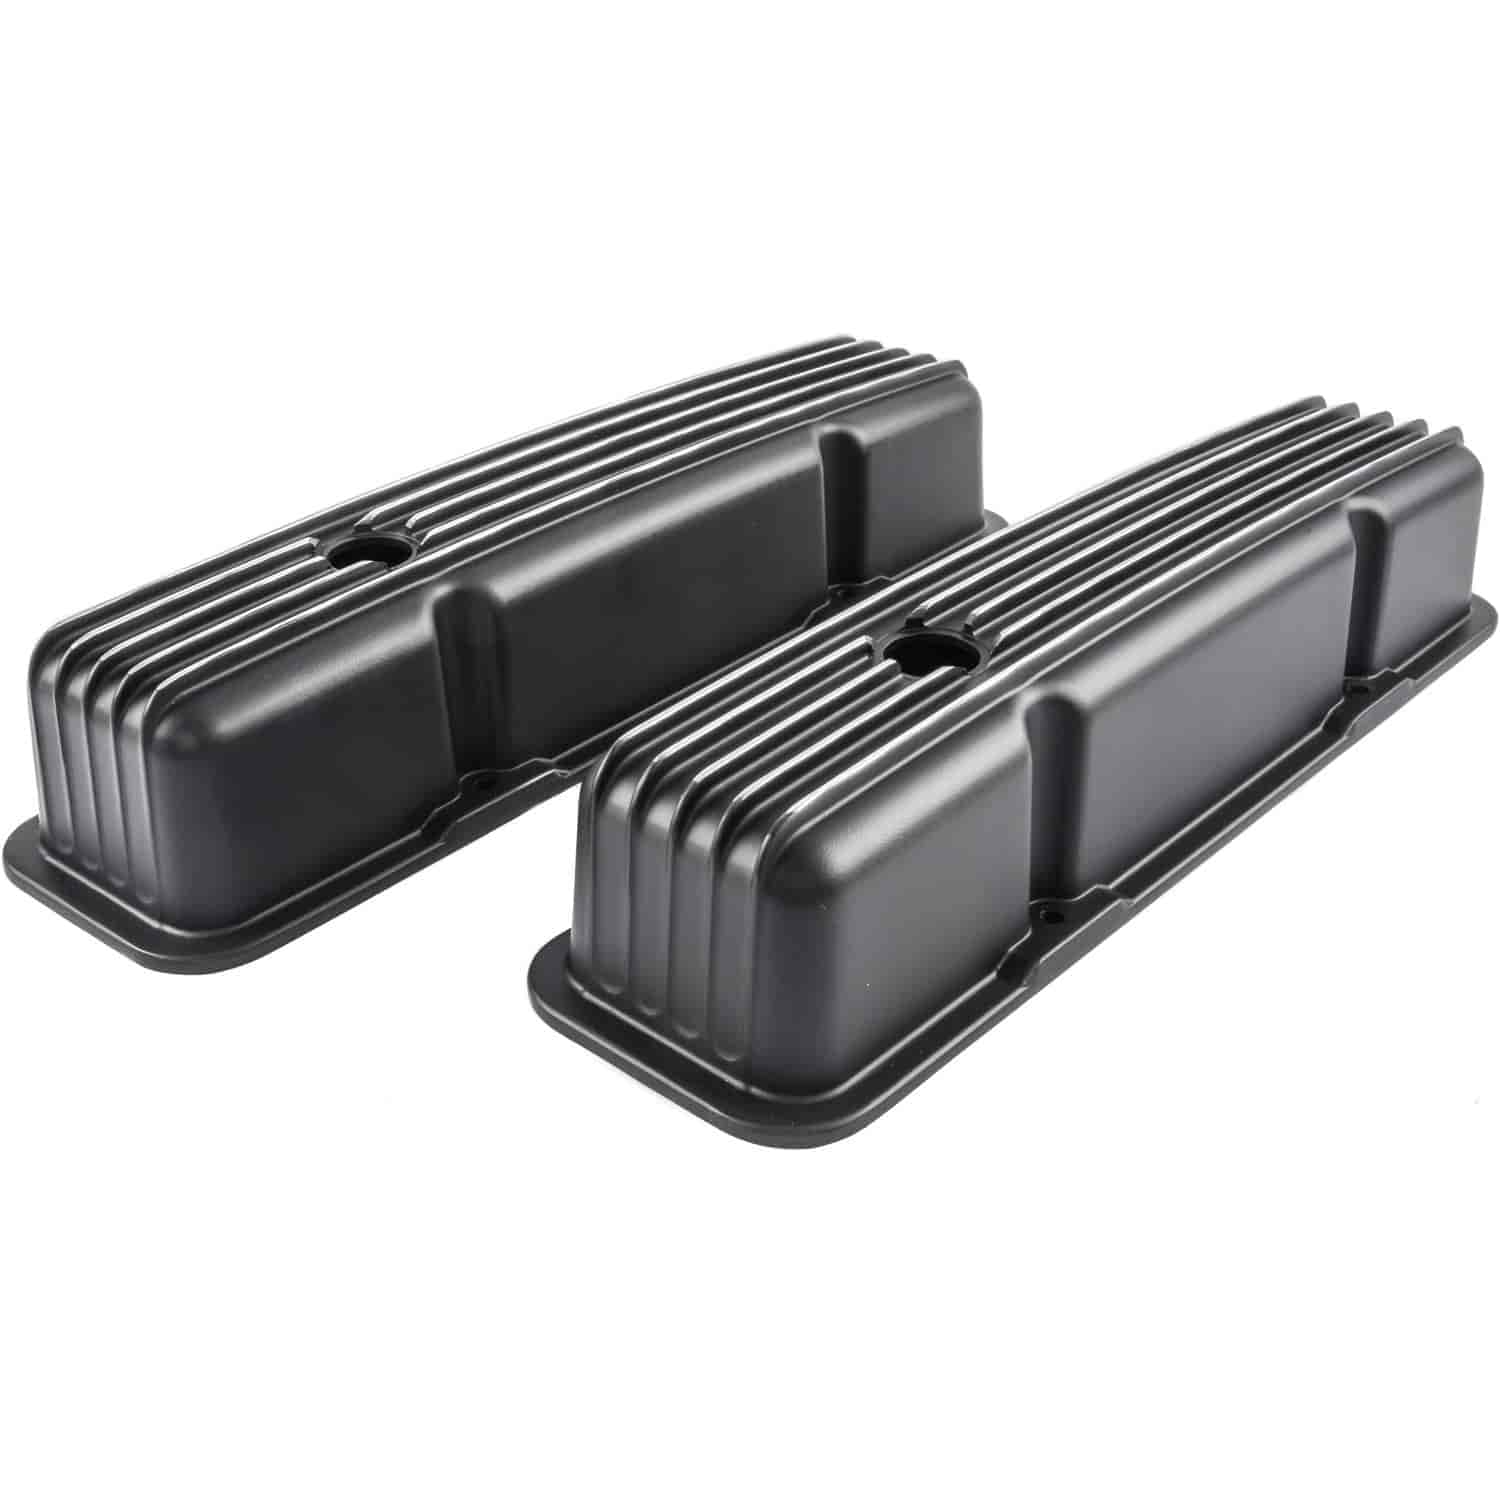 Black Finned Valve Covers for 1958-1986 Small Block